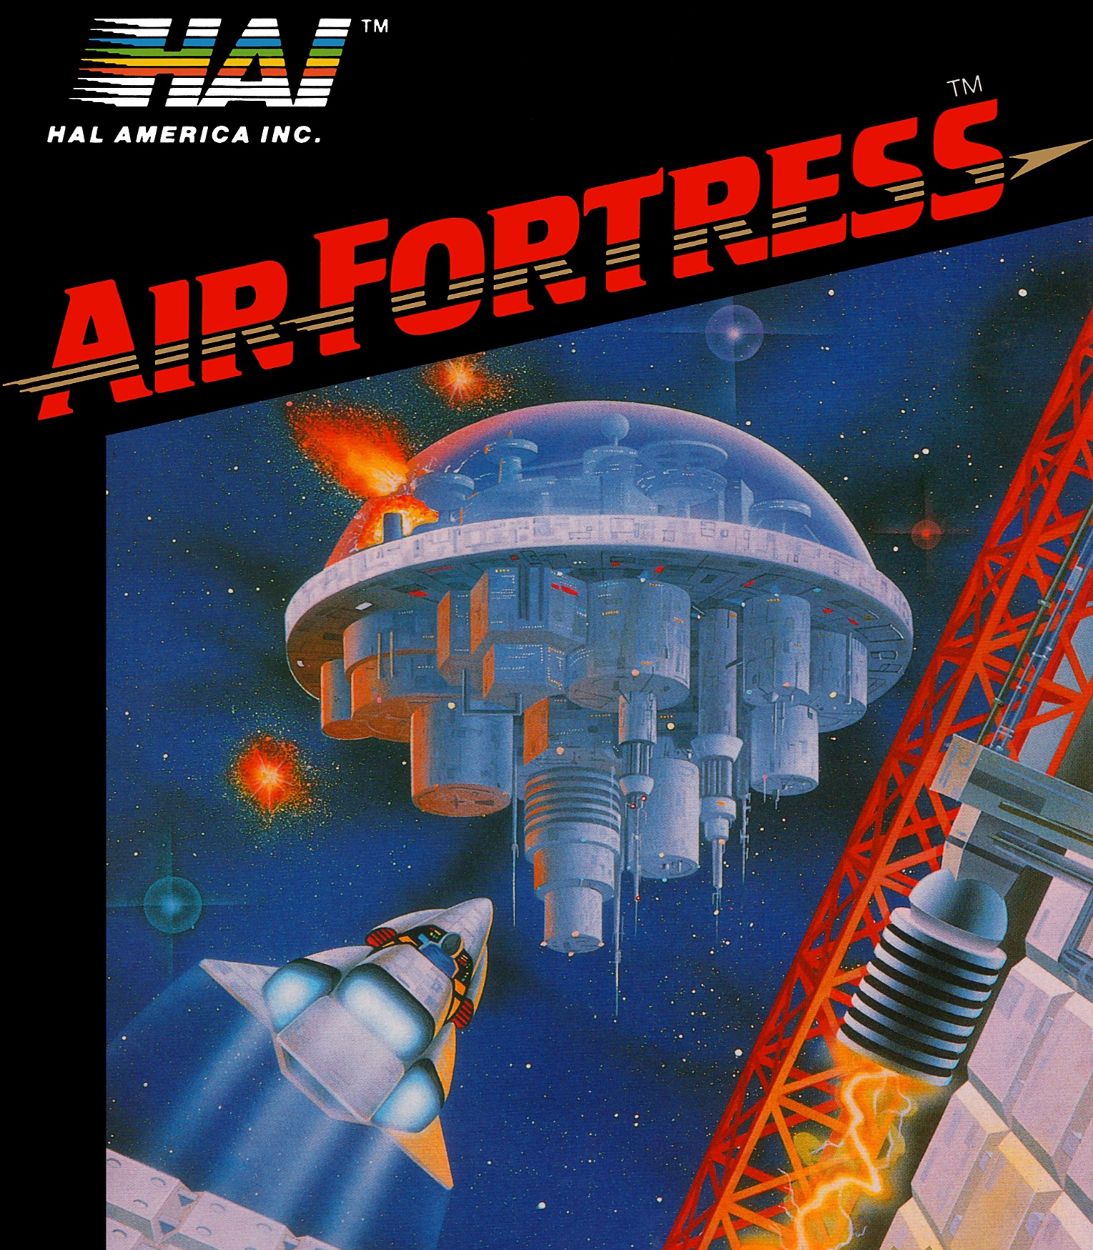 air fortress TLDR vertical